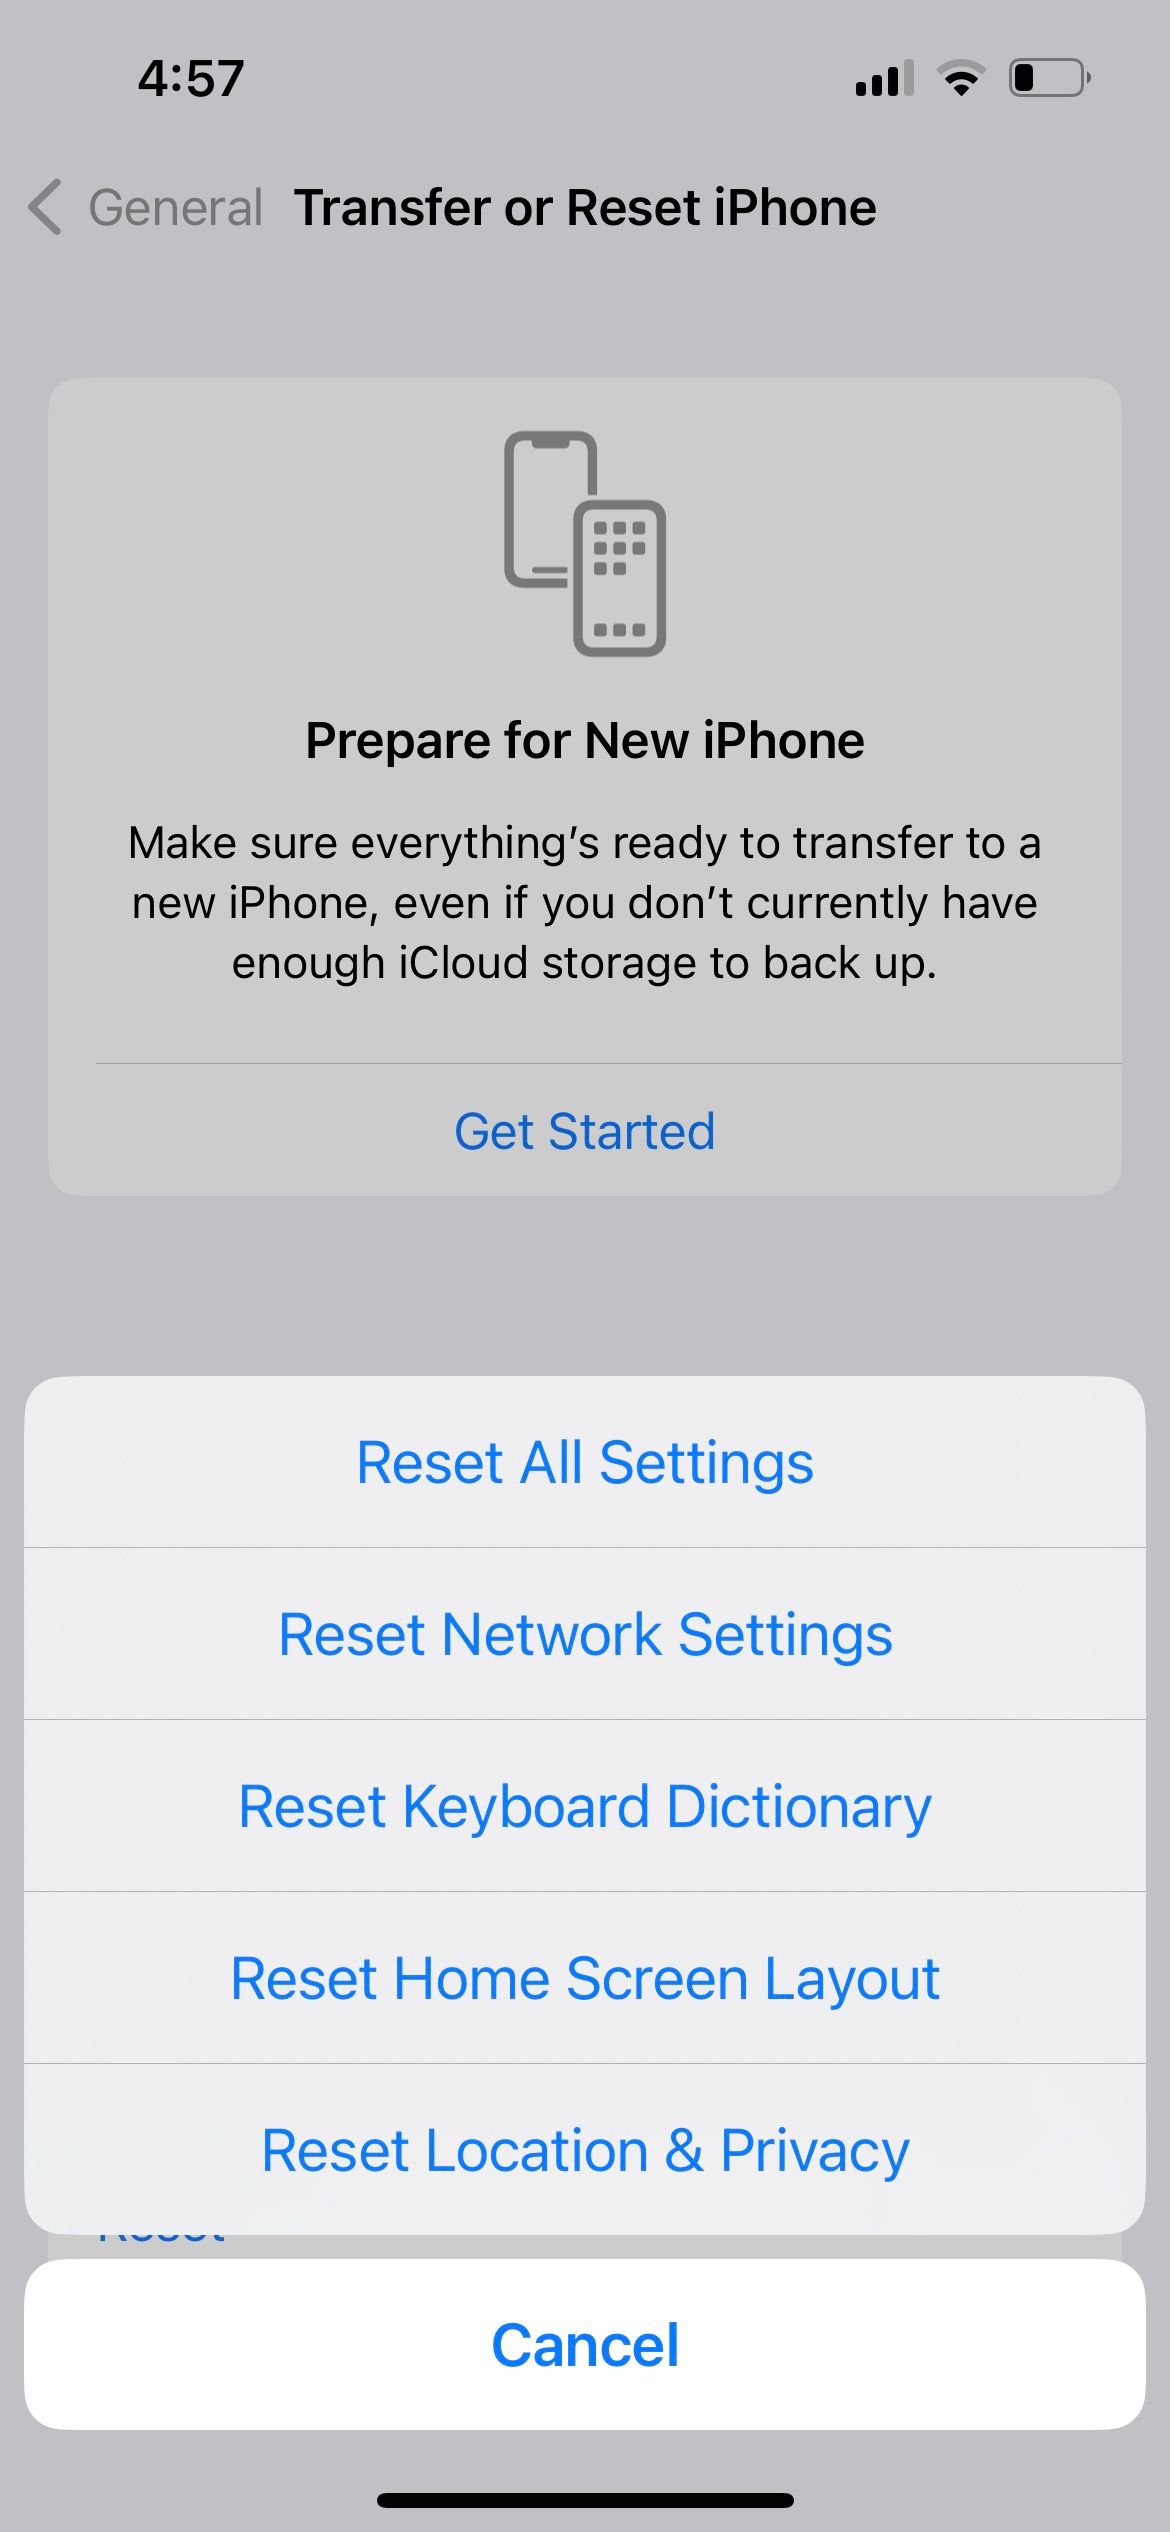 transfer or reset iphone settings confirmation window